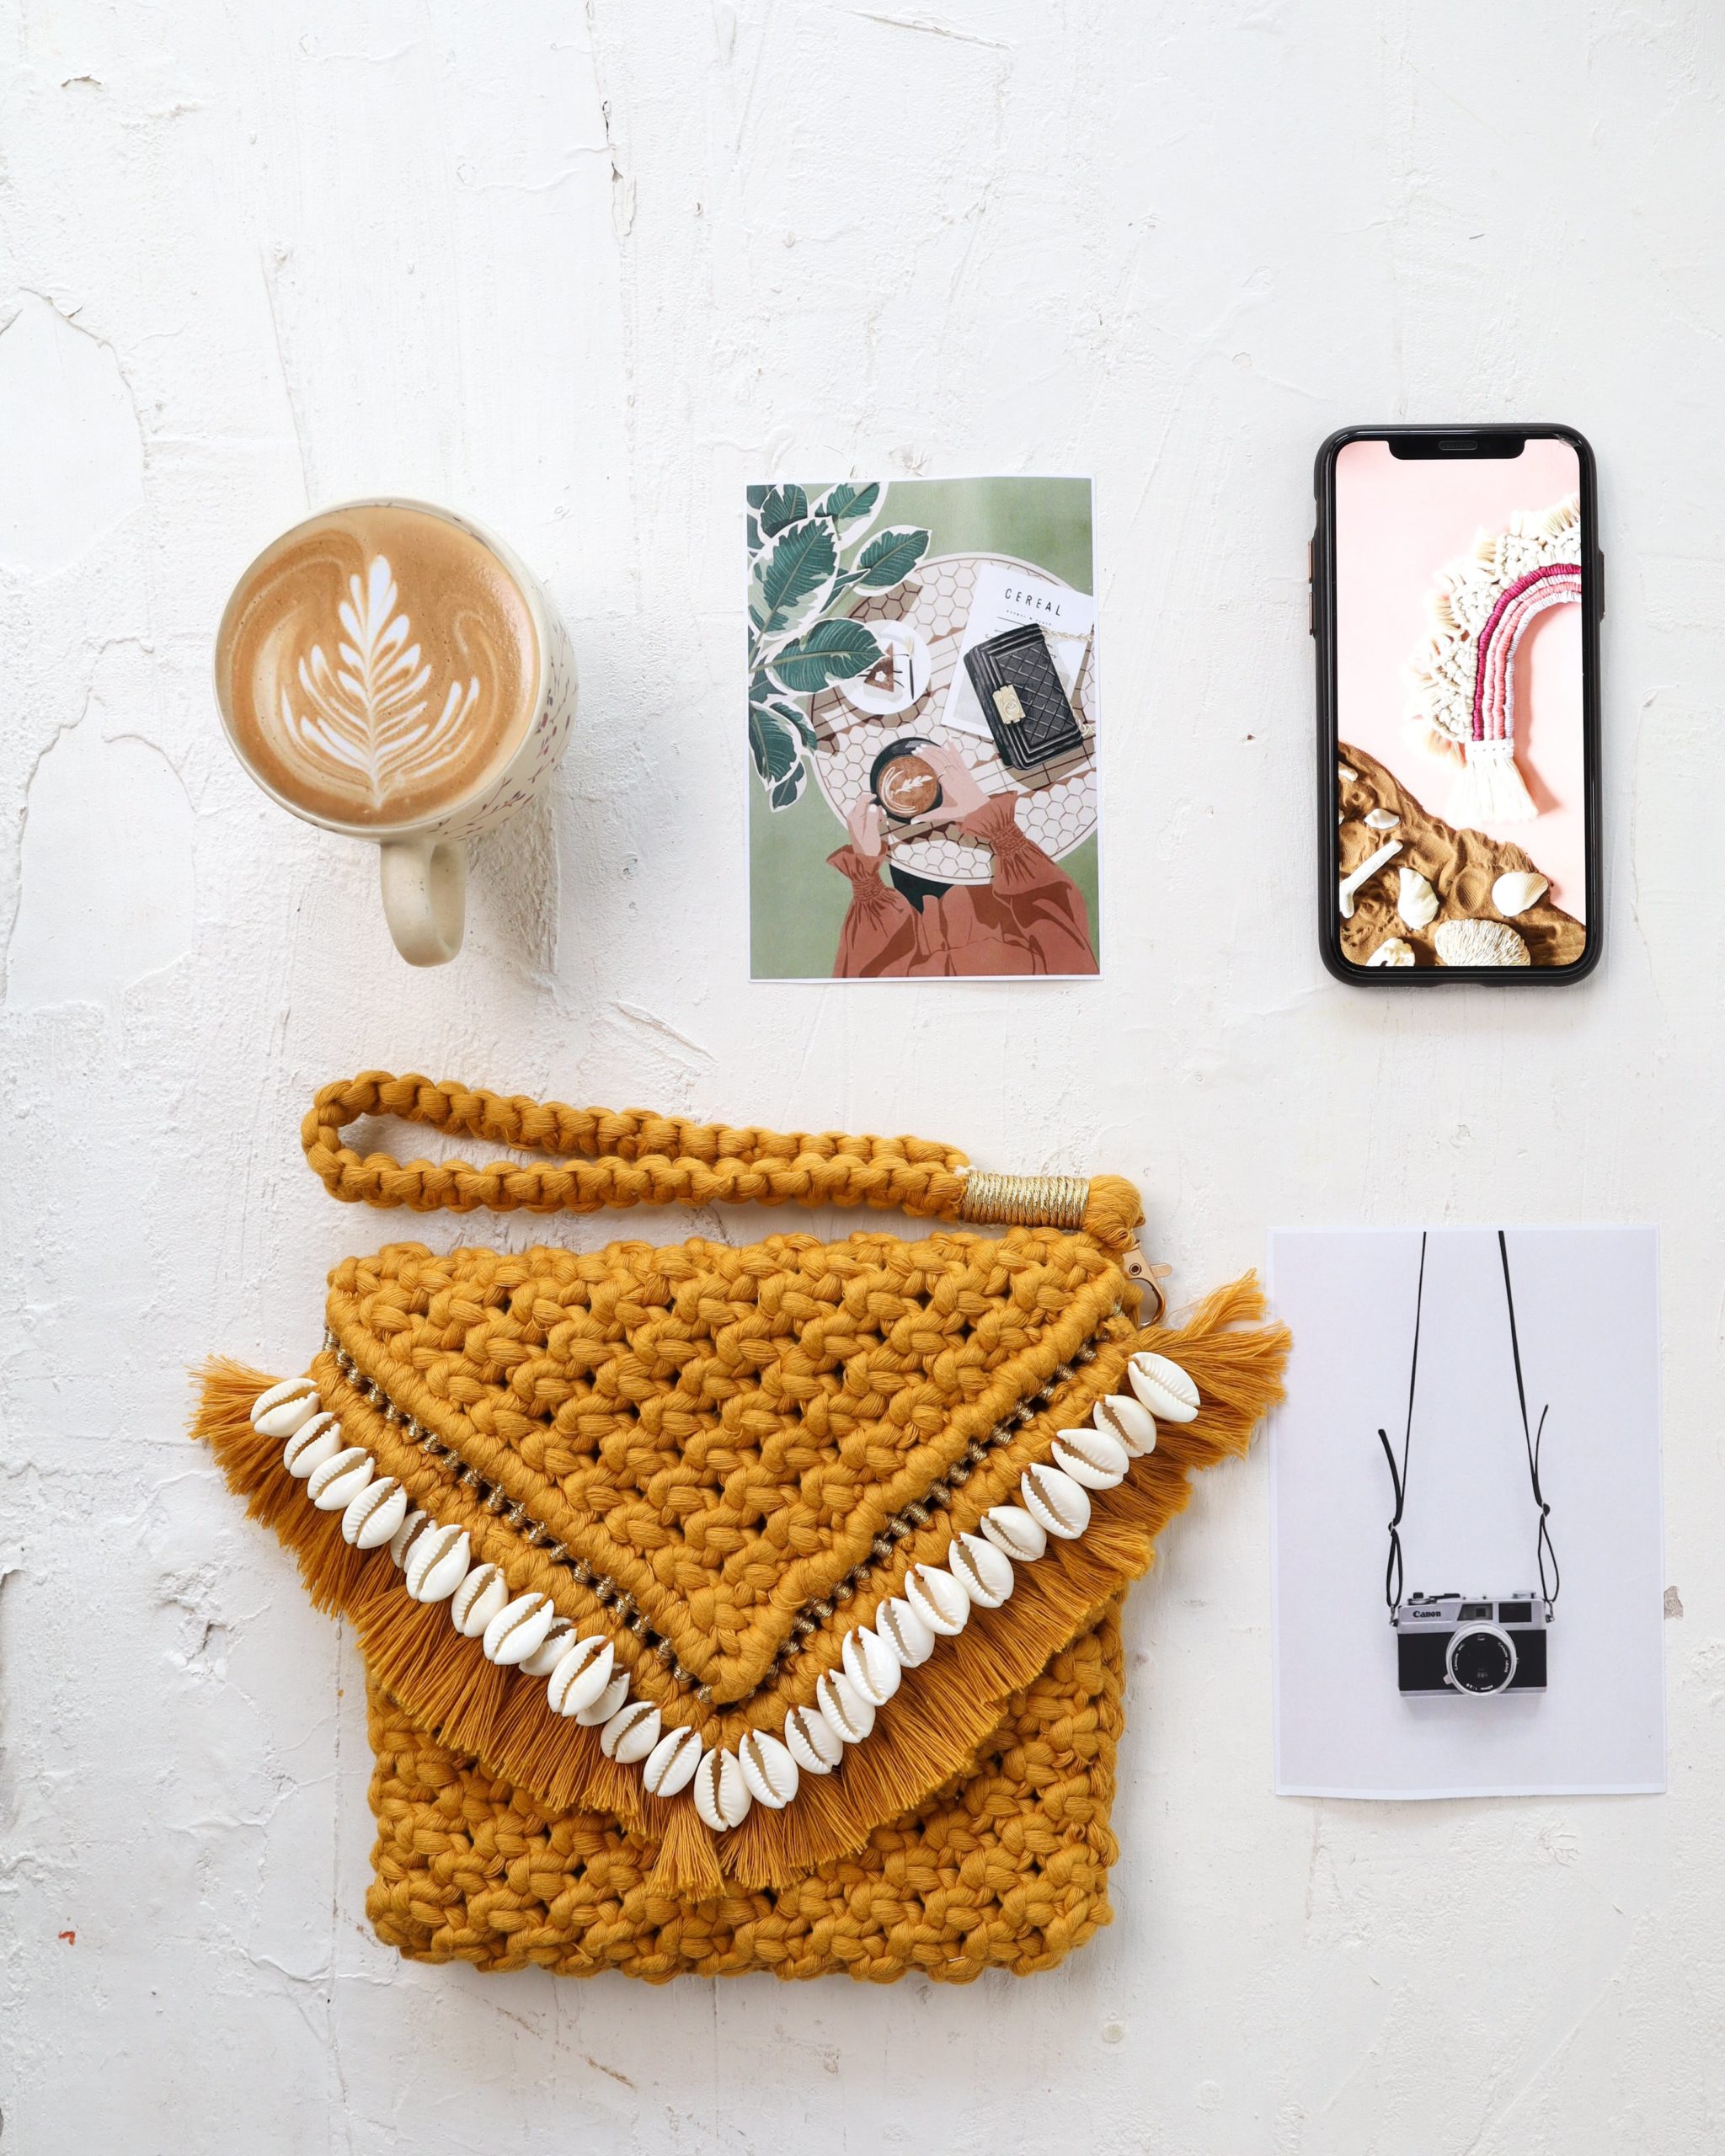 Learn the art of Macrame while